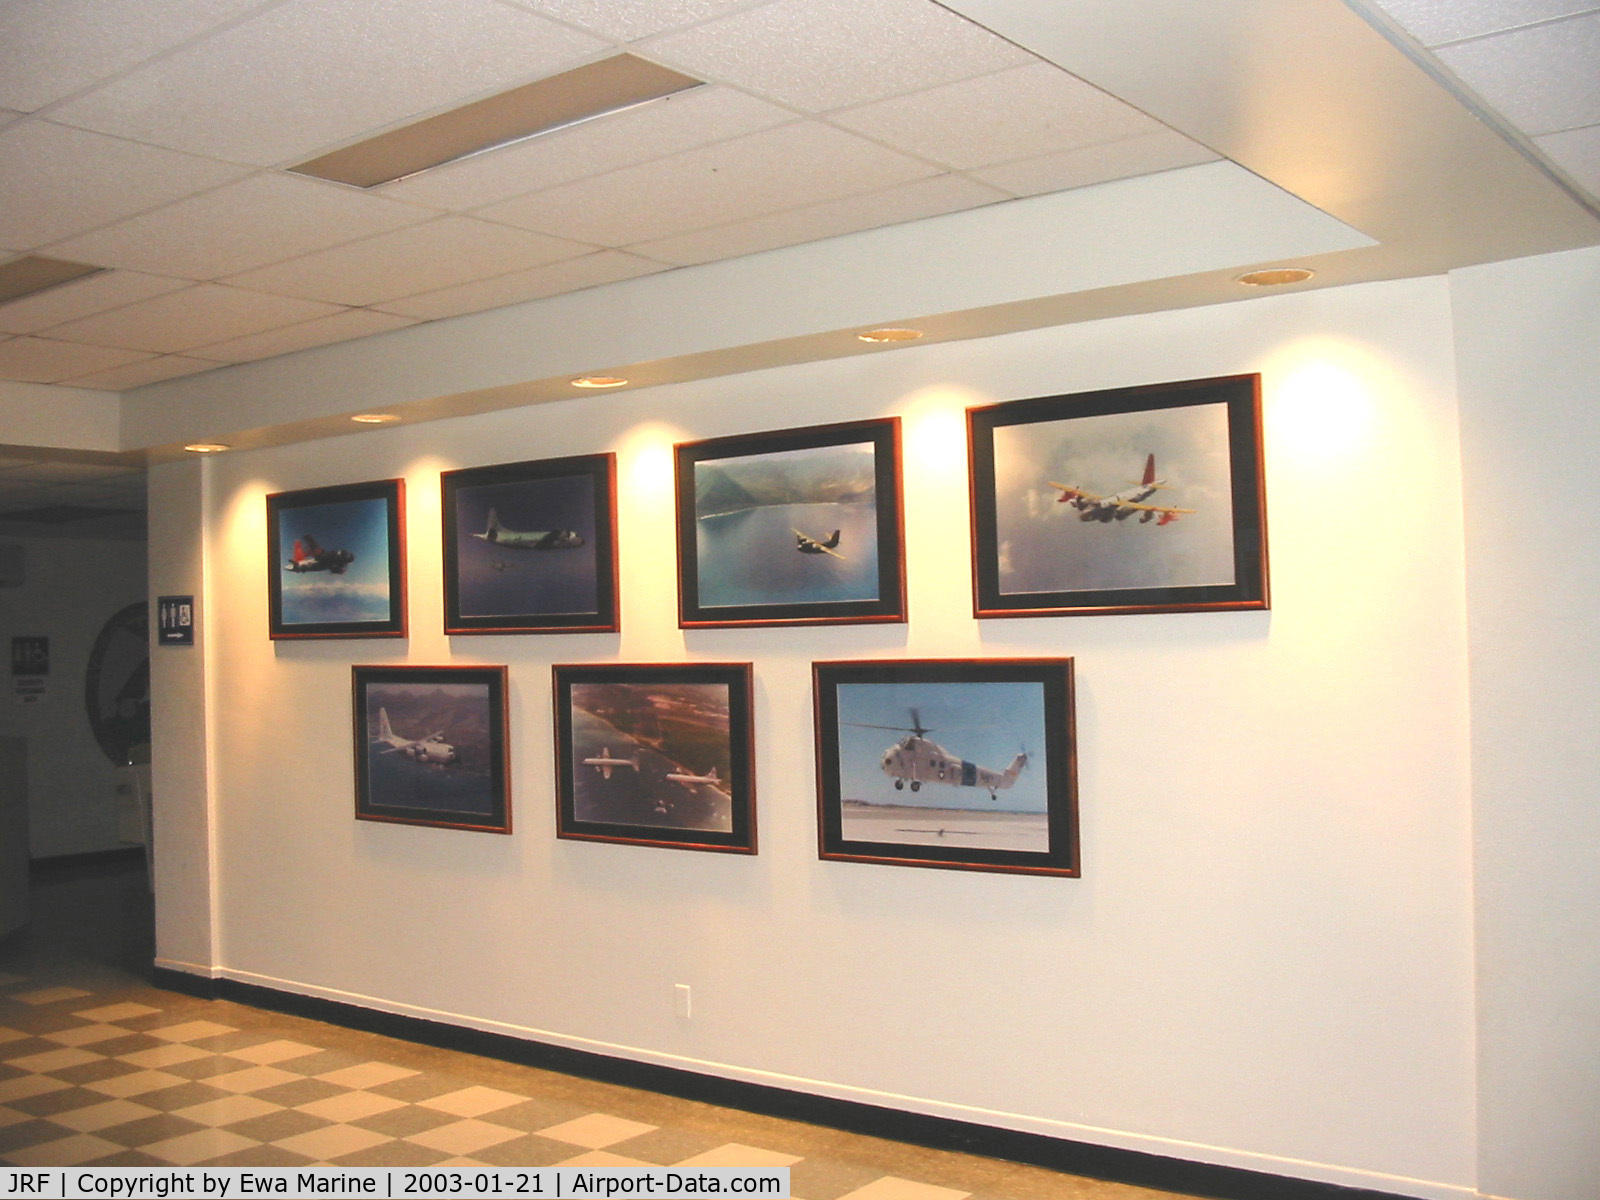 Kalaeloa (john Rodgers Field) Airport (JRF) - Hawaiian Aviation Preservation Society (HAPS) members work after revamping tower lobby with historic pictures of the airports past aircraft